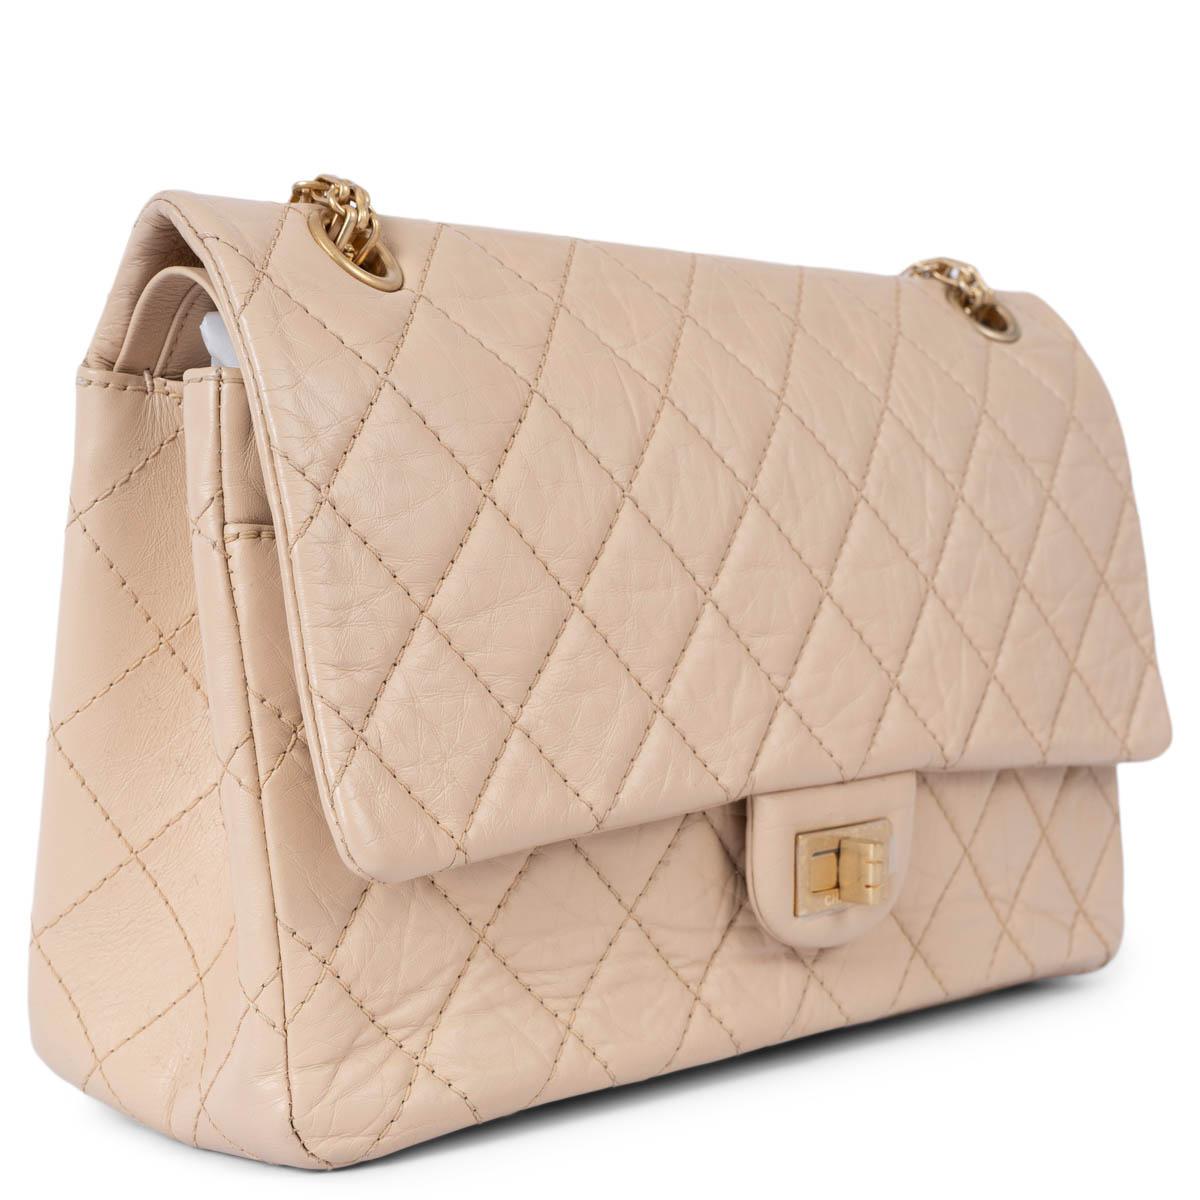 100% authentic Chanel Large 2.55 Reissue 226 double flap bag in nude aged calfskin featuring classic diamond quilted stitchings. Opens with a turn-lock to a black and burgundy smooth calfskin interior with two patch pockets and one lipstick pocket